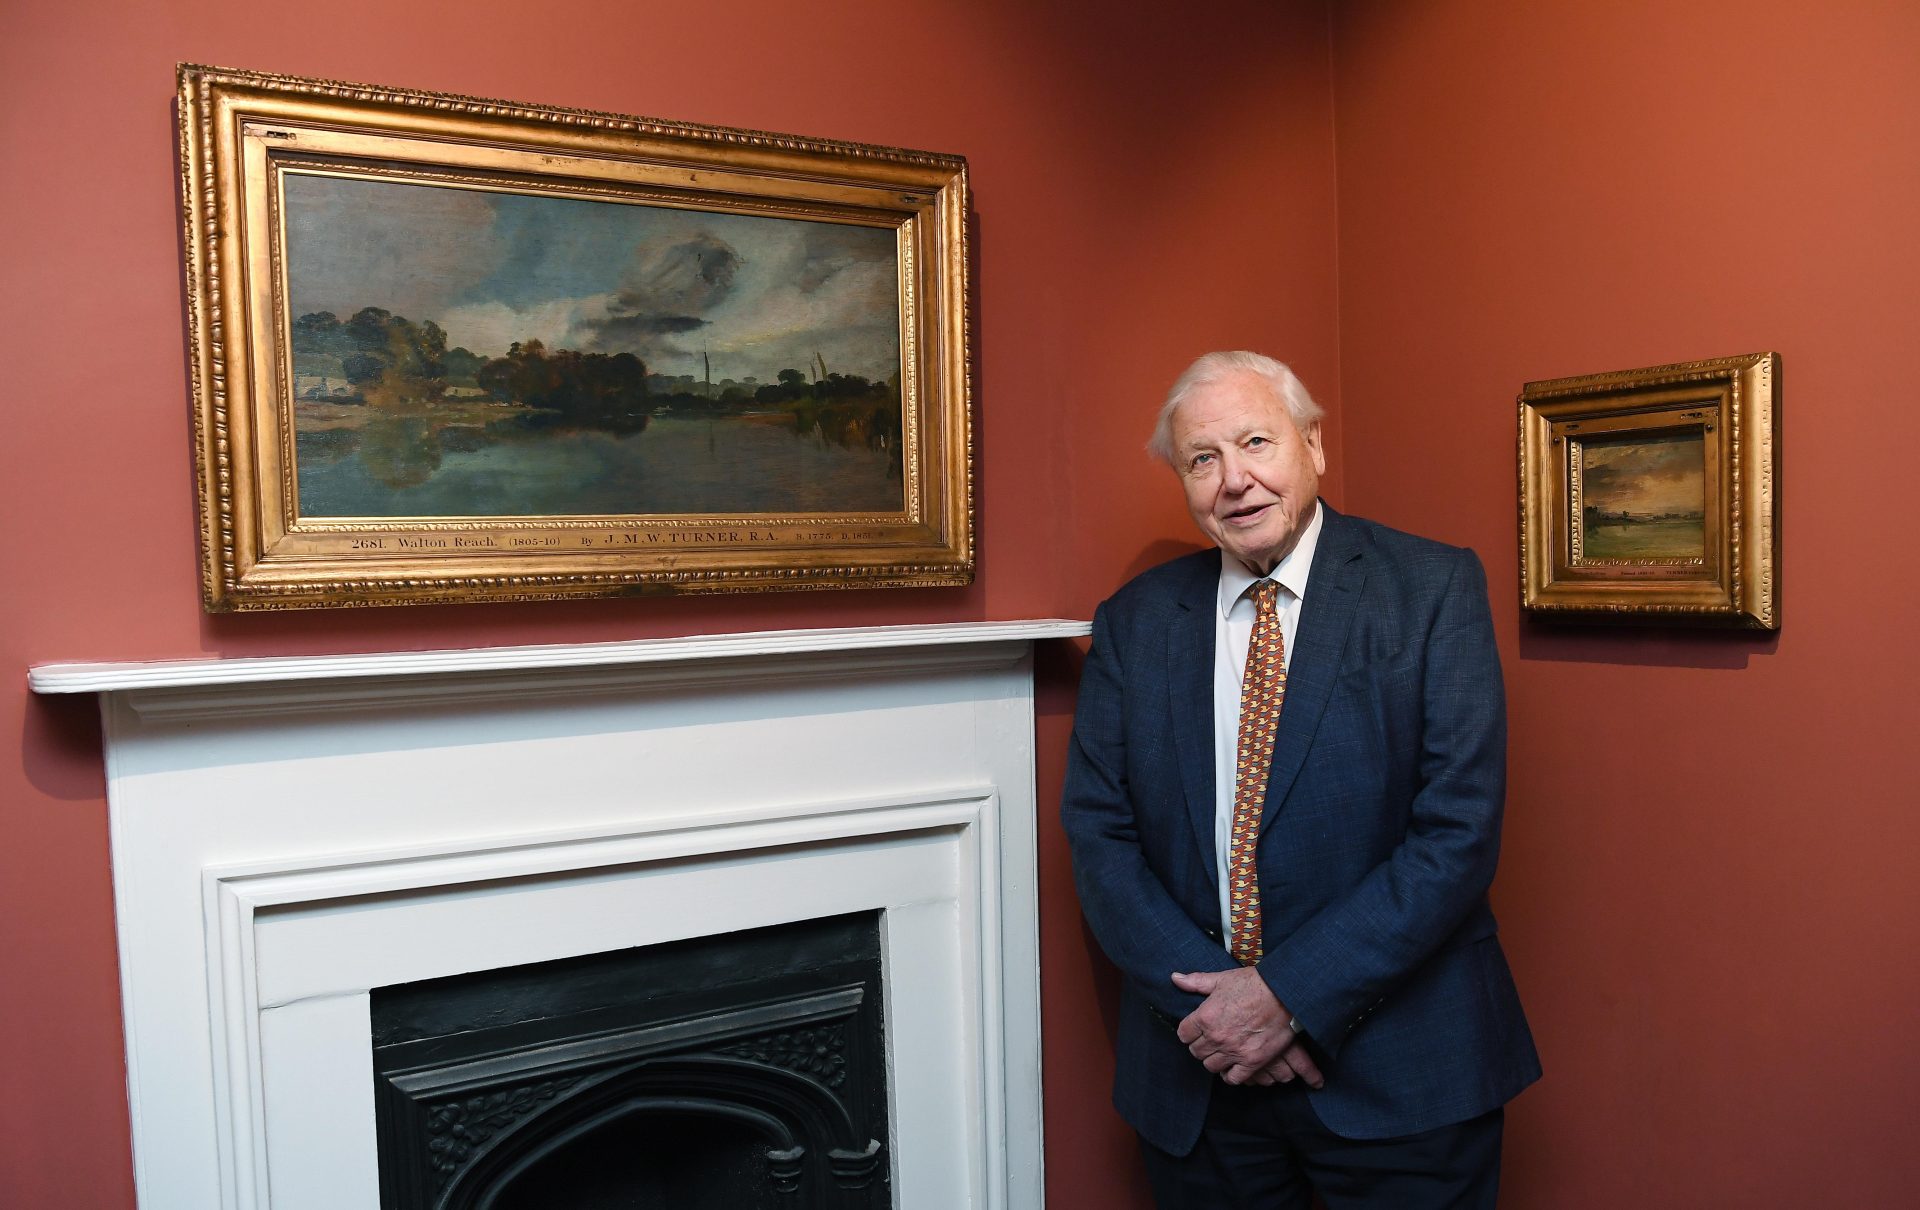 Sir David Attenborough opens Turner's House exhiibt in London